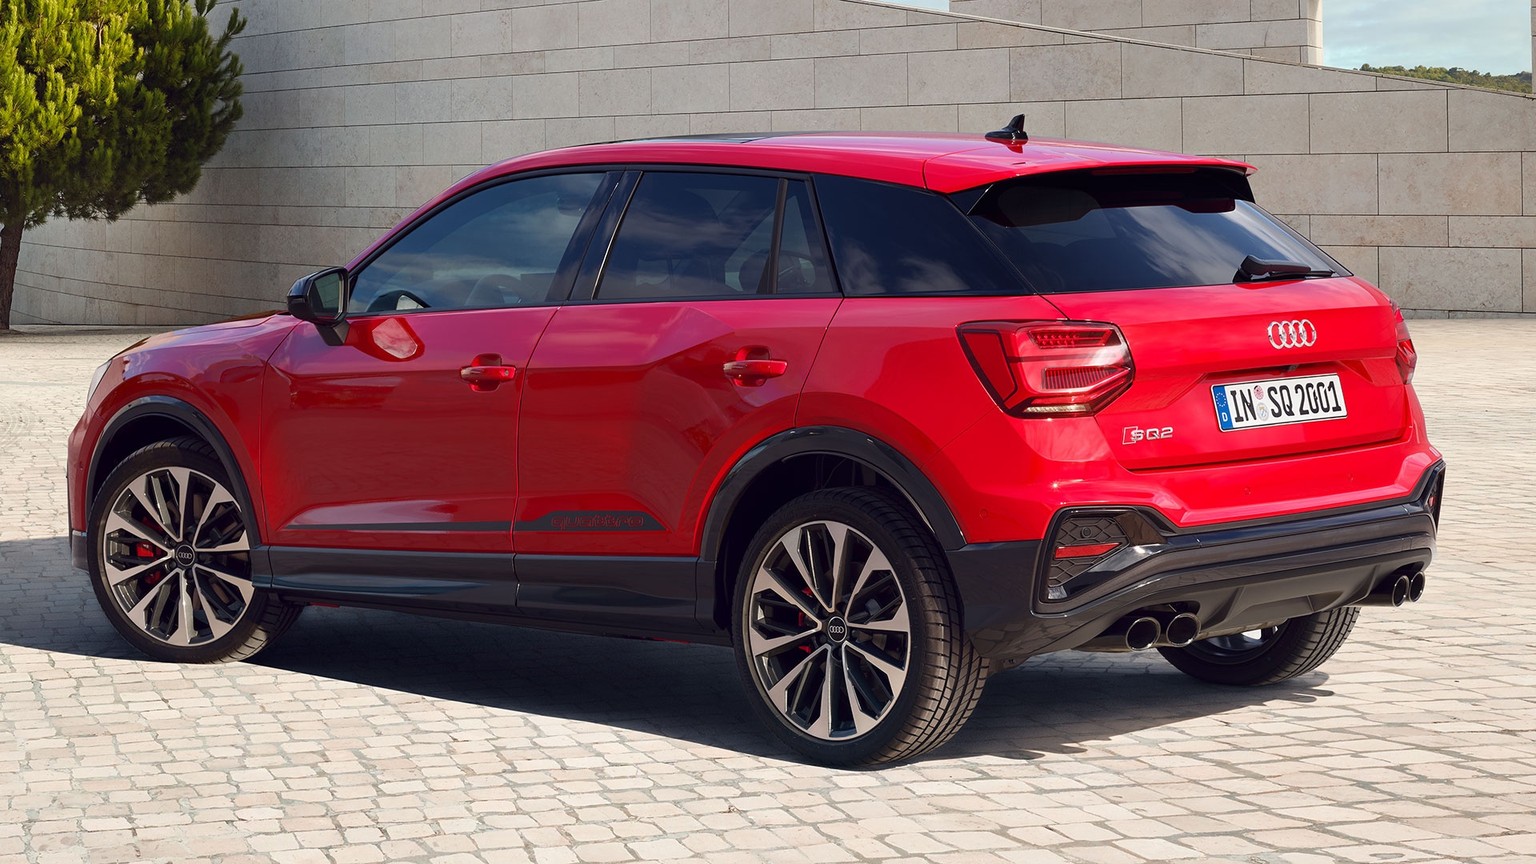 Rear-side view of the Audi SQ2.